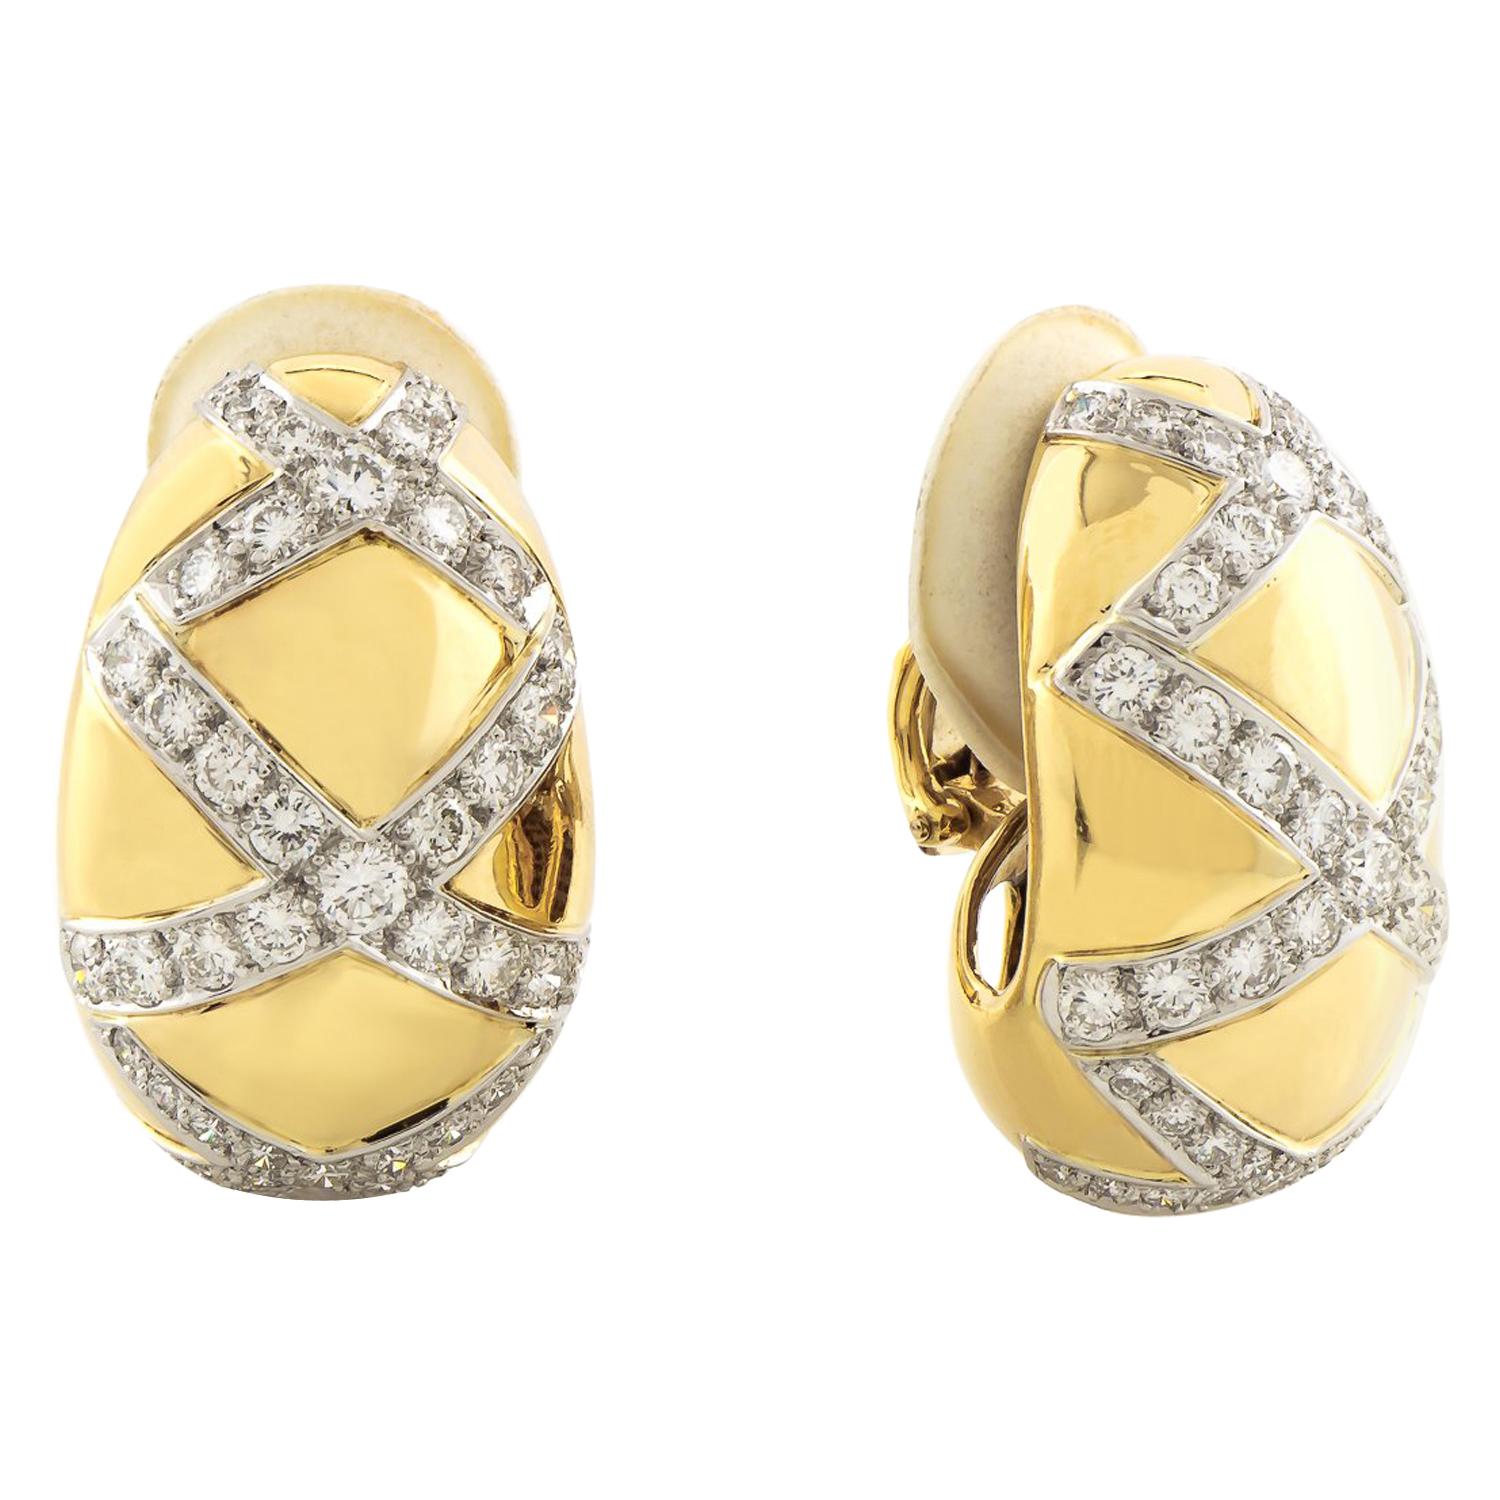 18 Karat White and Yellow Gold Dome Crisscross Clip-On Earrings